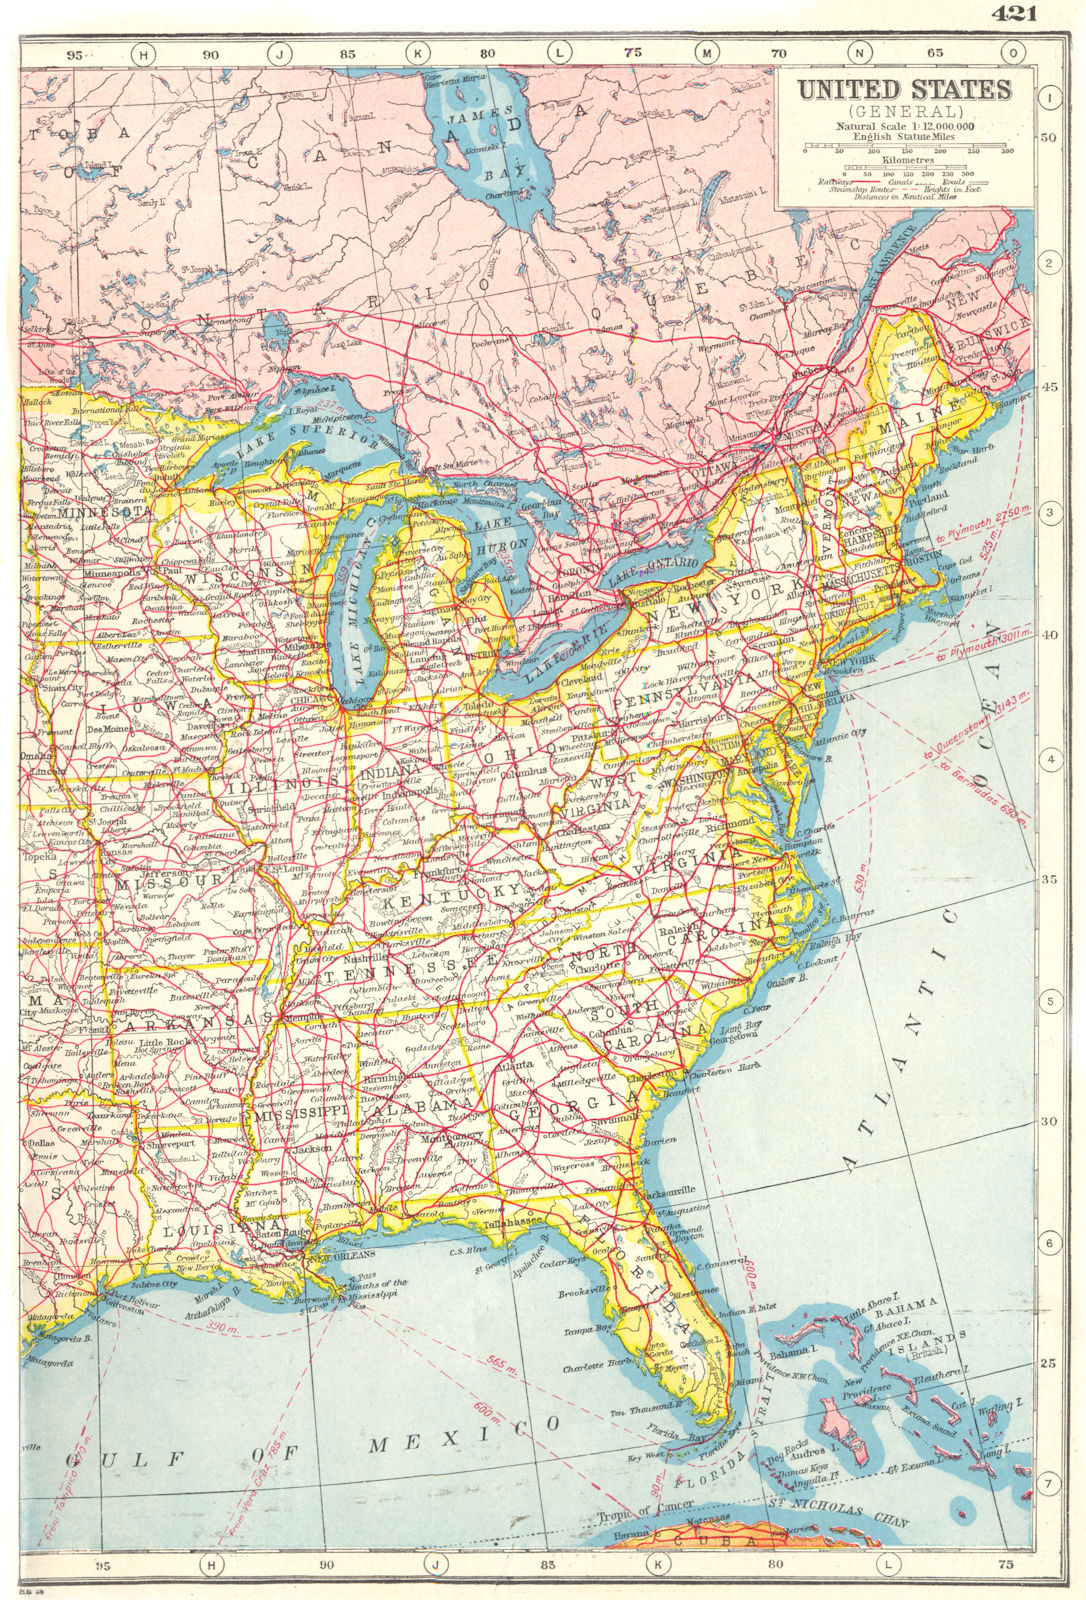 UNITED STATES EAST RAILWAYS. Roads canals steamship routes. USA 1920 old map